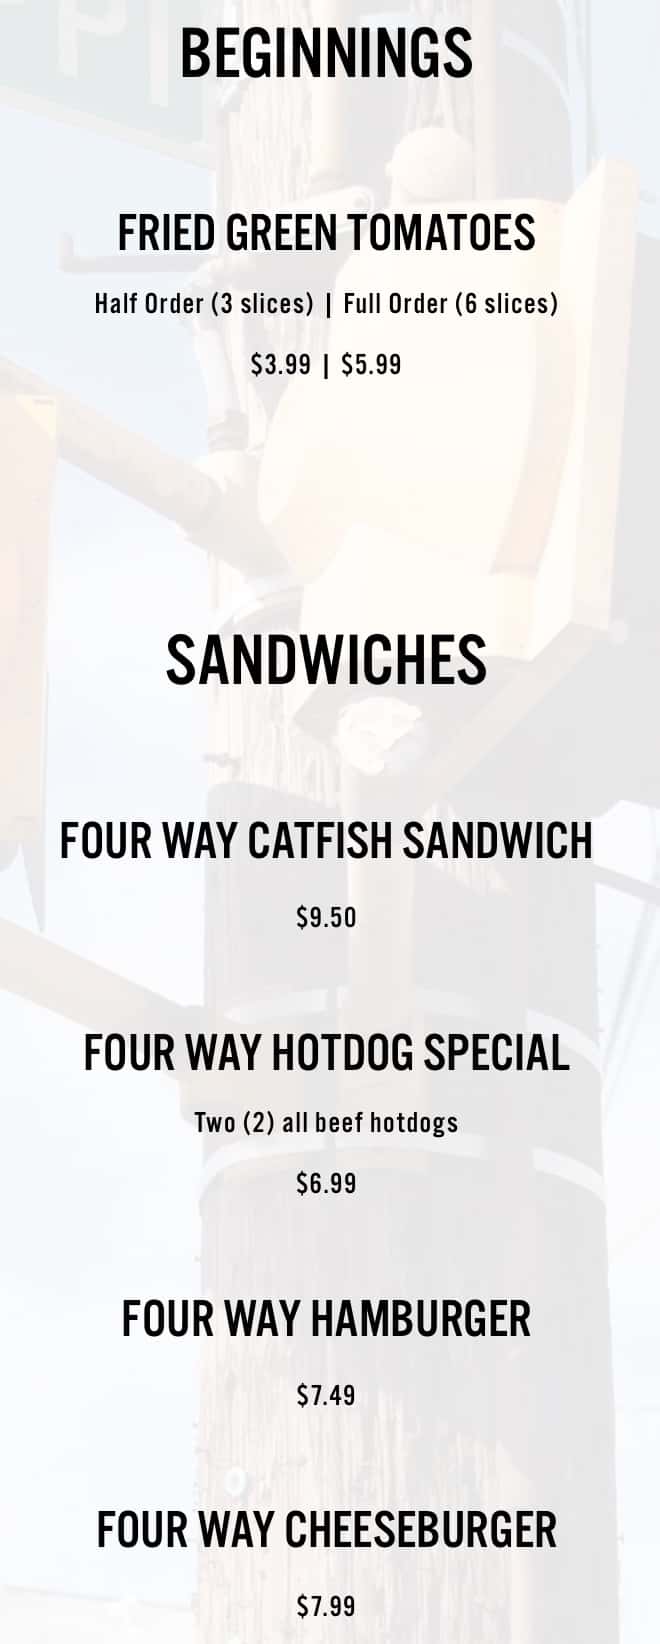 Four Way Restaurant Menu With Prices